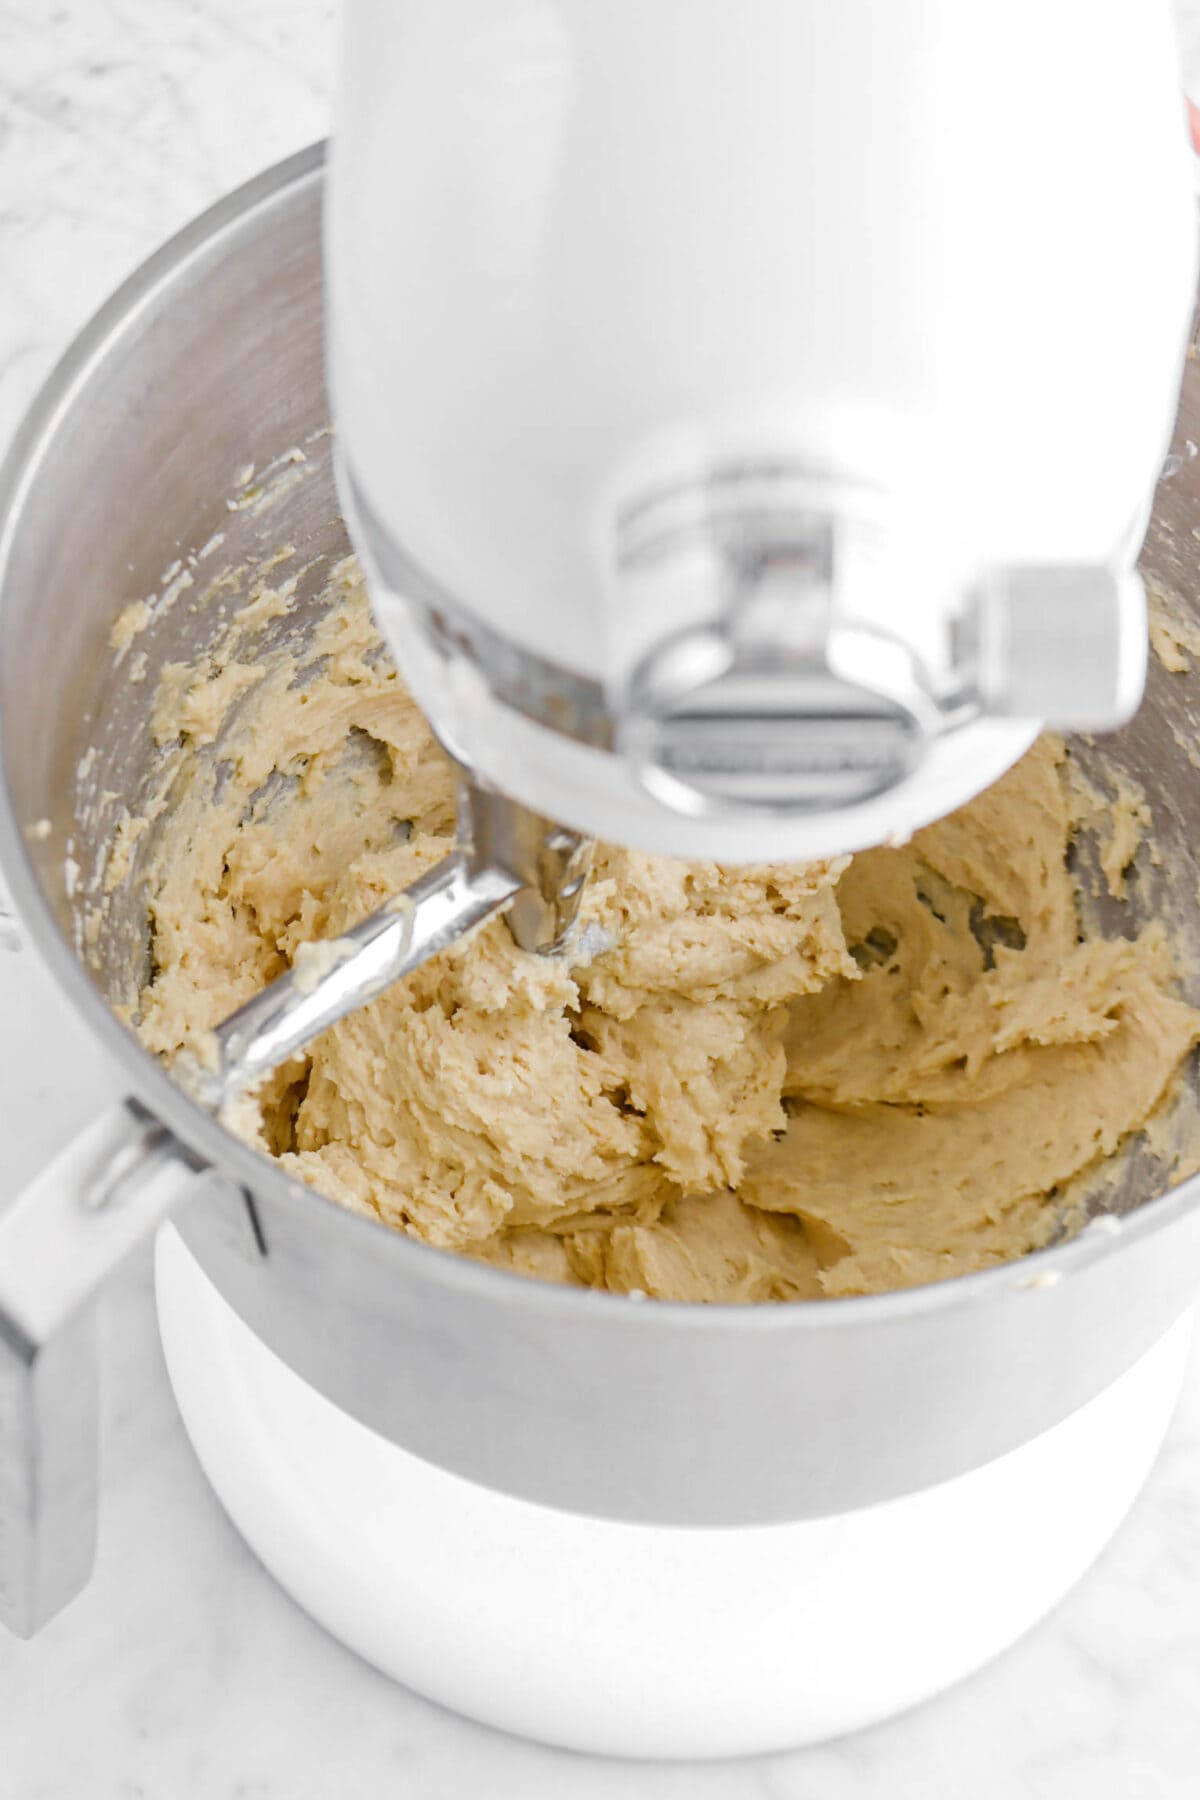 thick cake batter in mixer